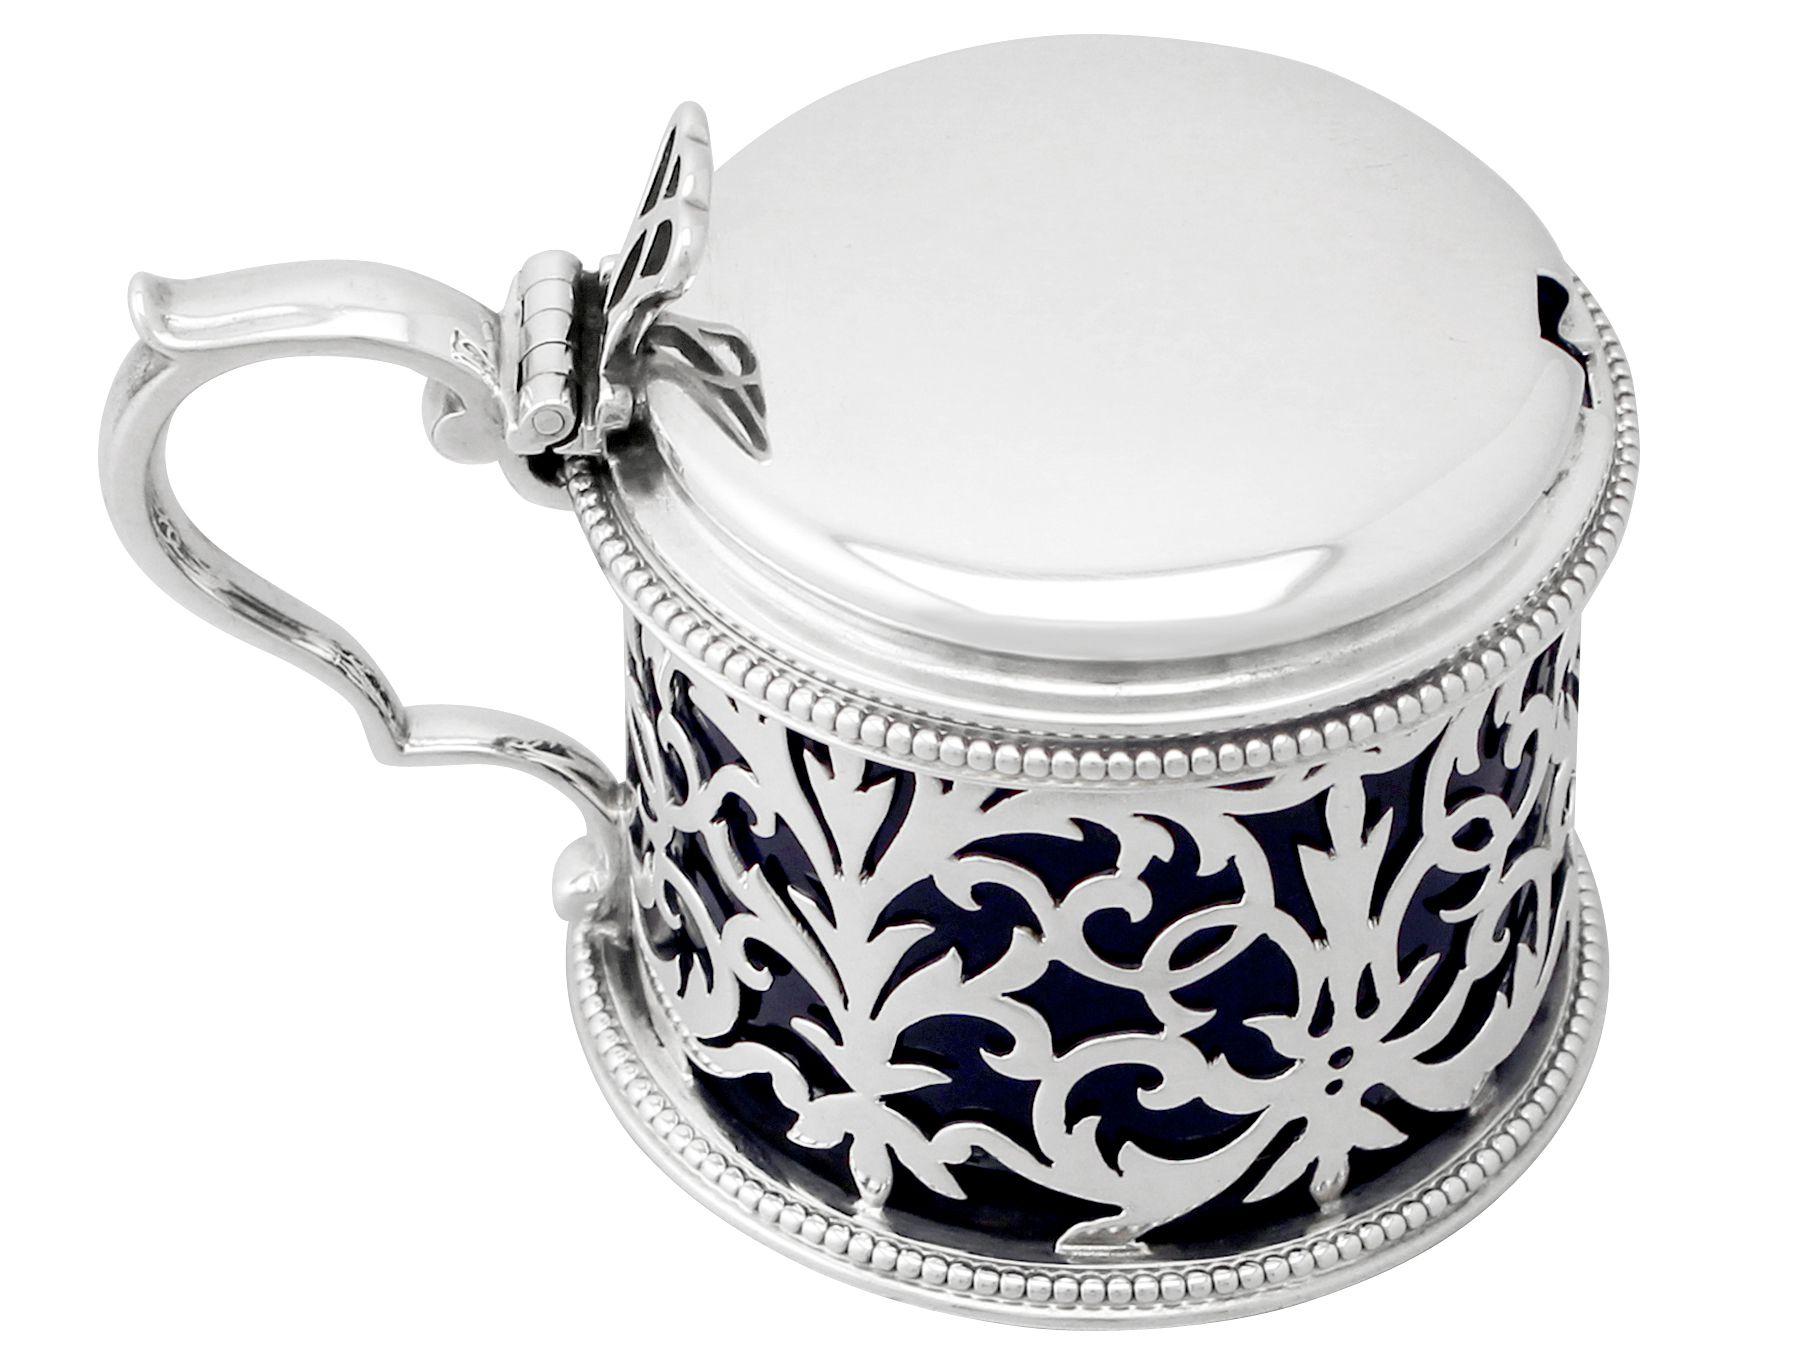 An exceptional, fine and impressive antique Victorian English sterling silver mustard pot made by Edward & John Barnard; an addition to our silver cruets/condiments collection.

This exceptional antique Victorian sterling silver mustard pot has a